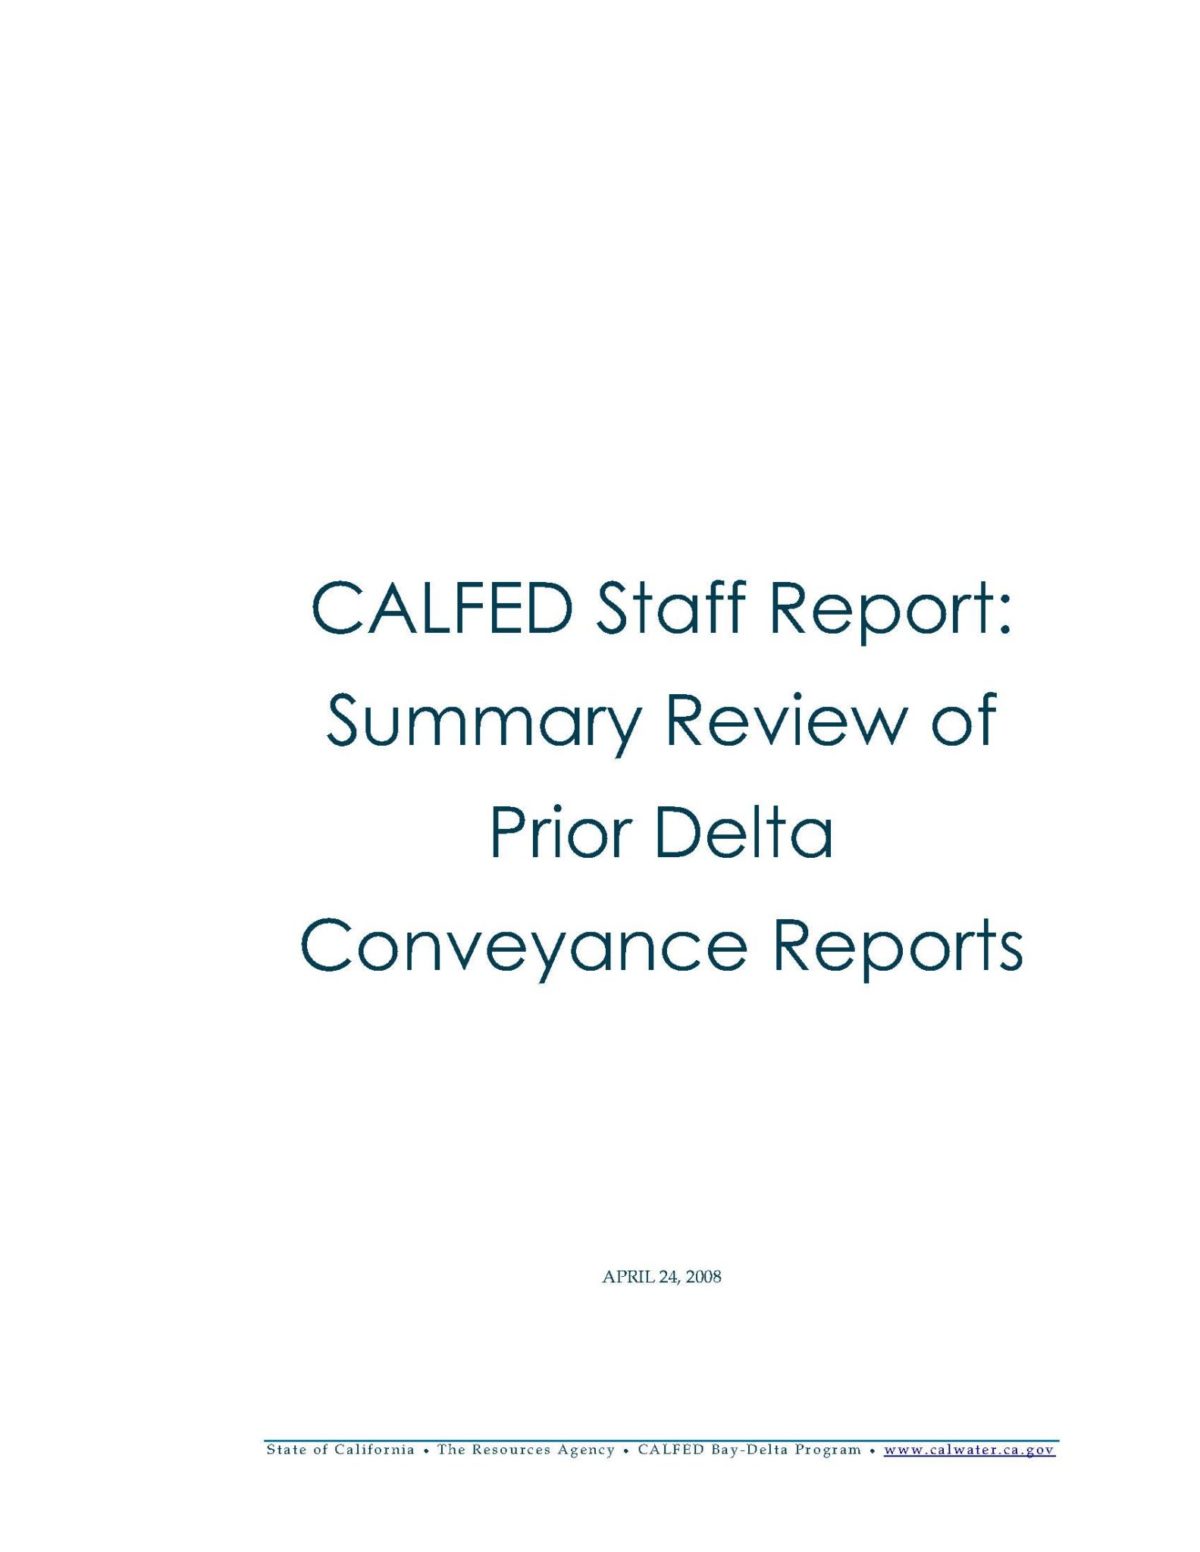 CALFED Staff Report: Summary Review of Prior Delta Conveyance Reports